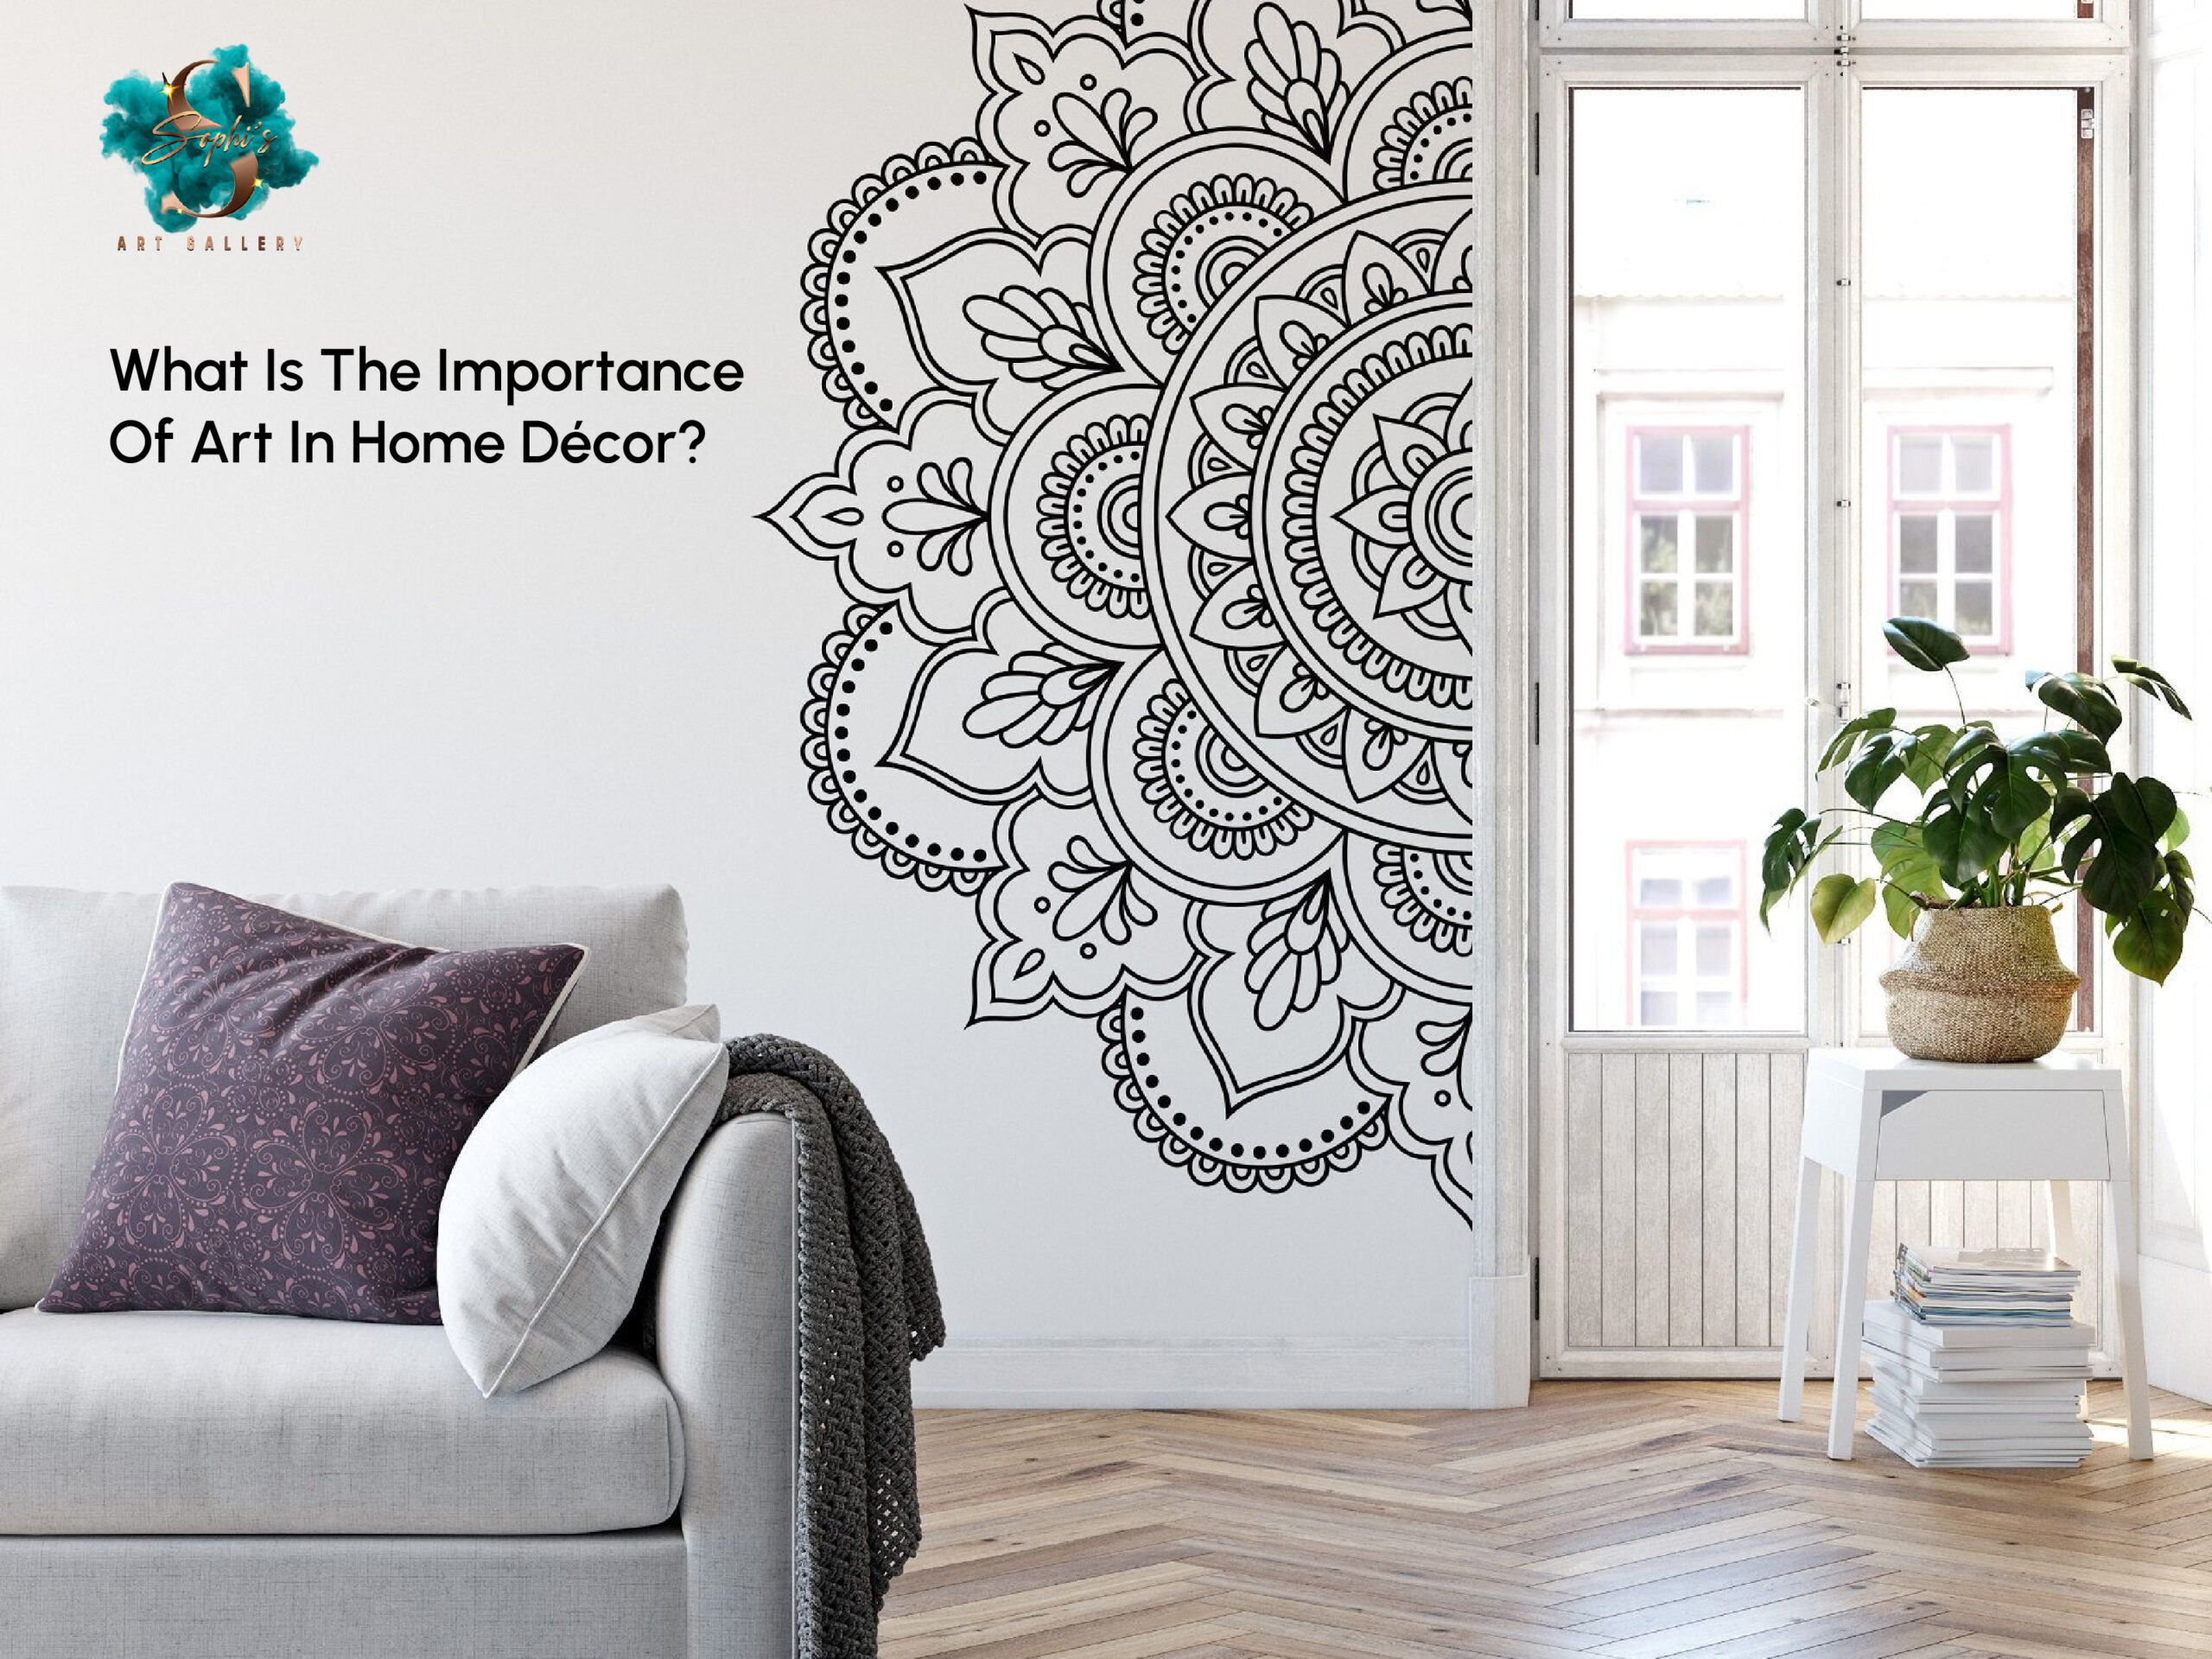 What Is The Importance Of Art In Home Décor